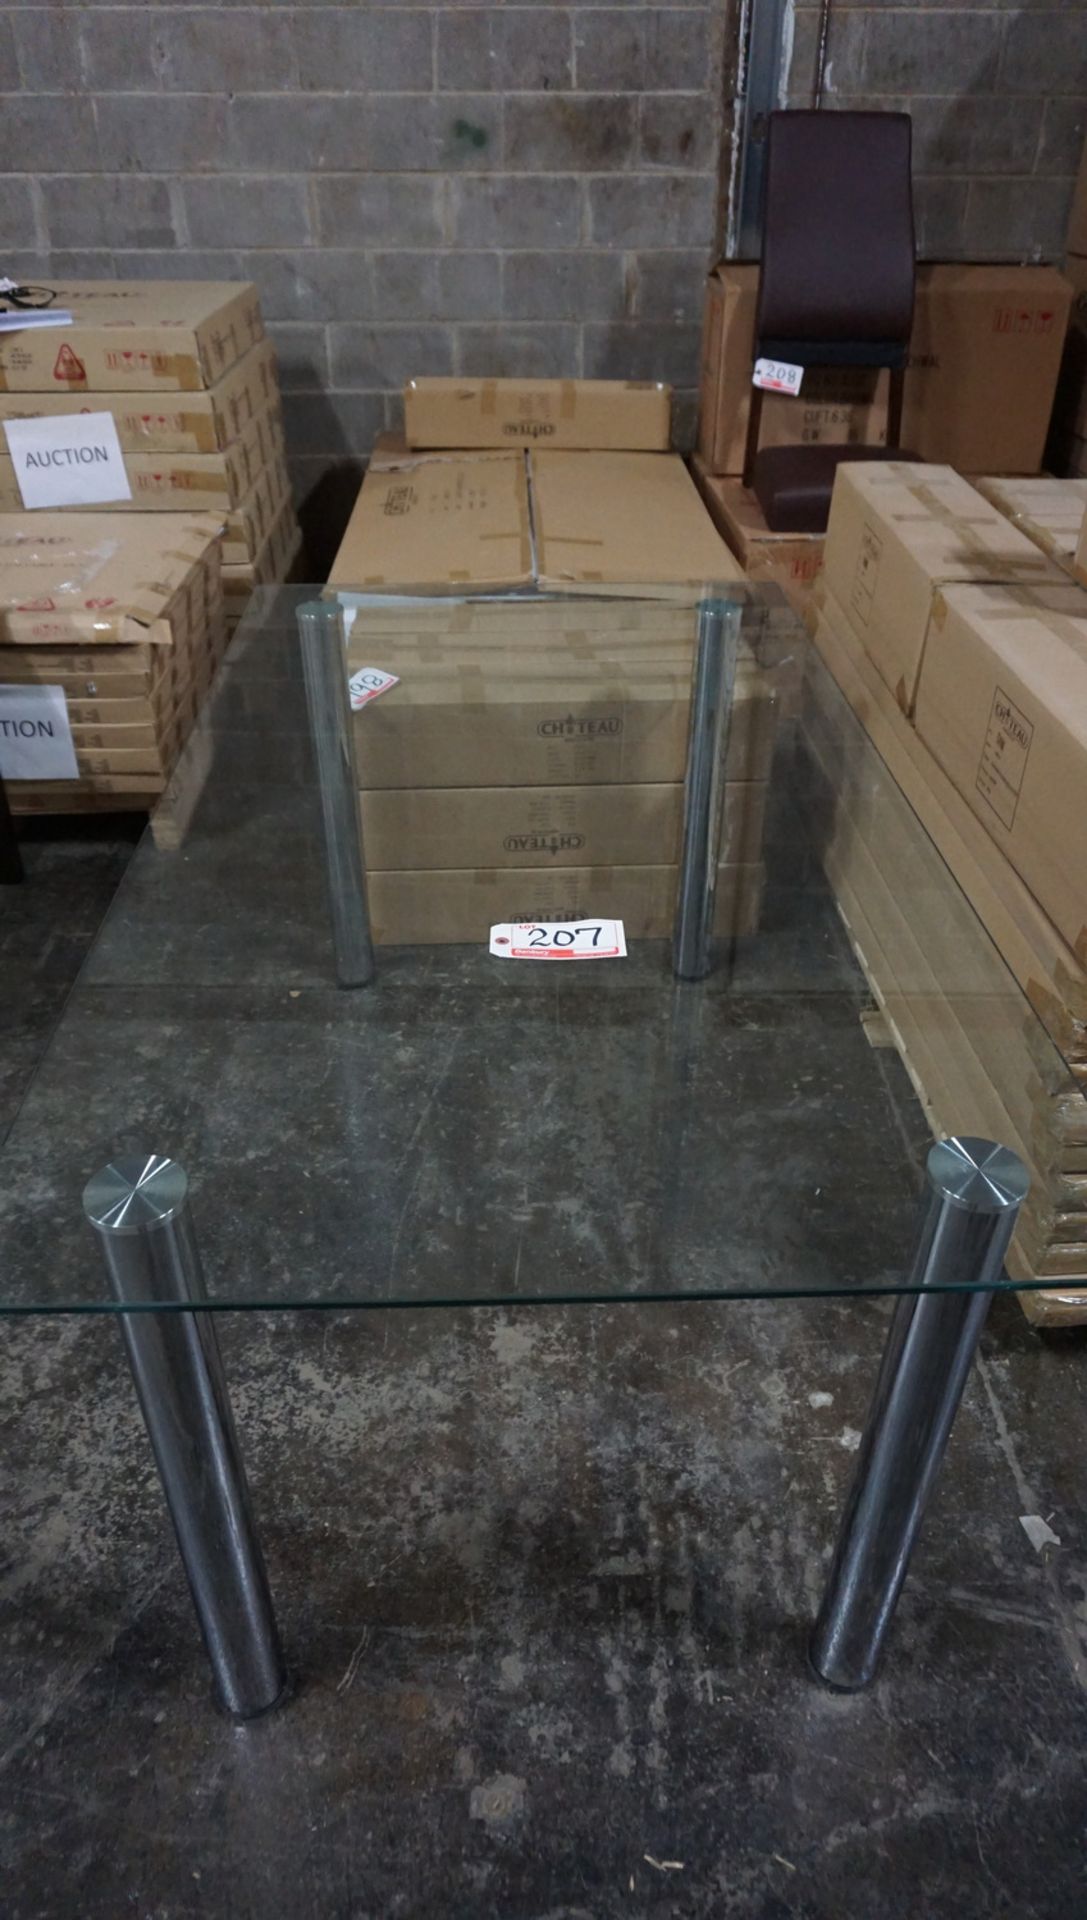 AMSTERDAM RECTANGLE CLEAR GLASS DINING TABLE 63"L X 35.25"W X 29.5"H W/ CHROME LEGS (AMST-D1) (IN